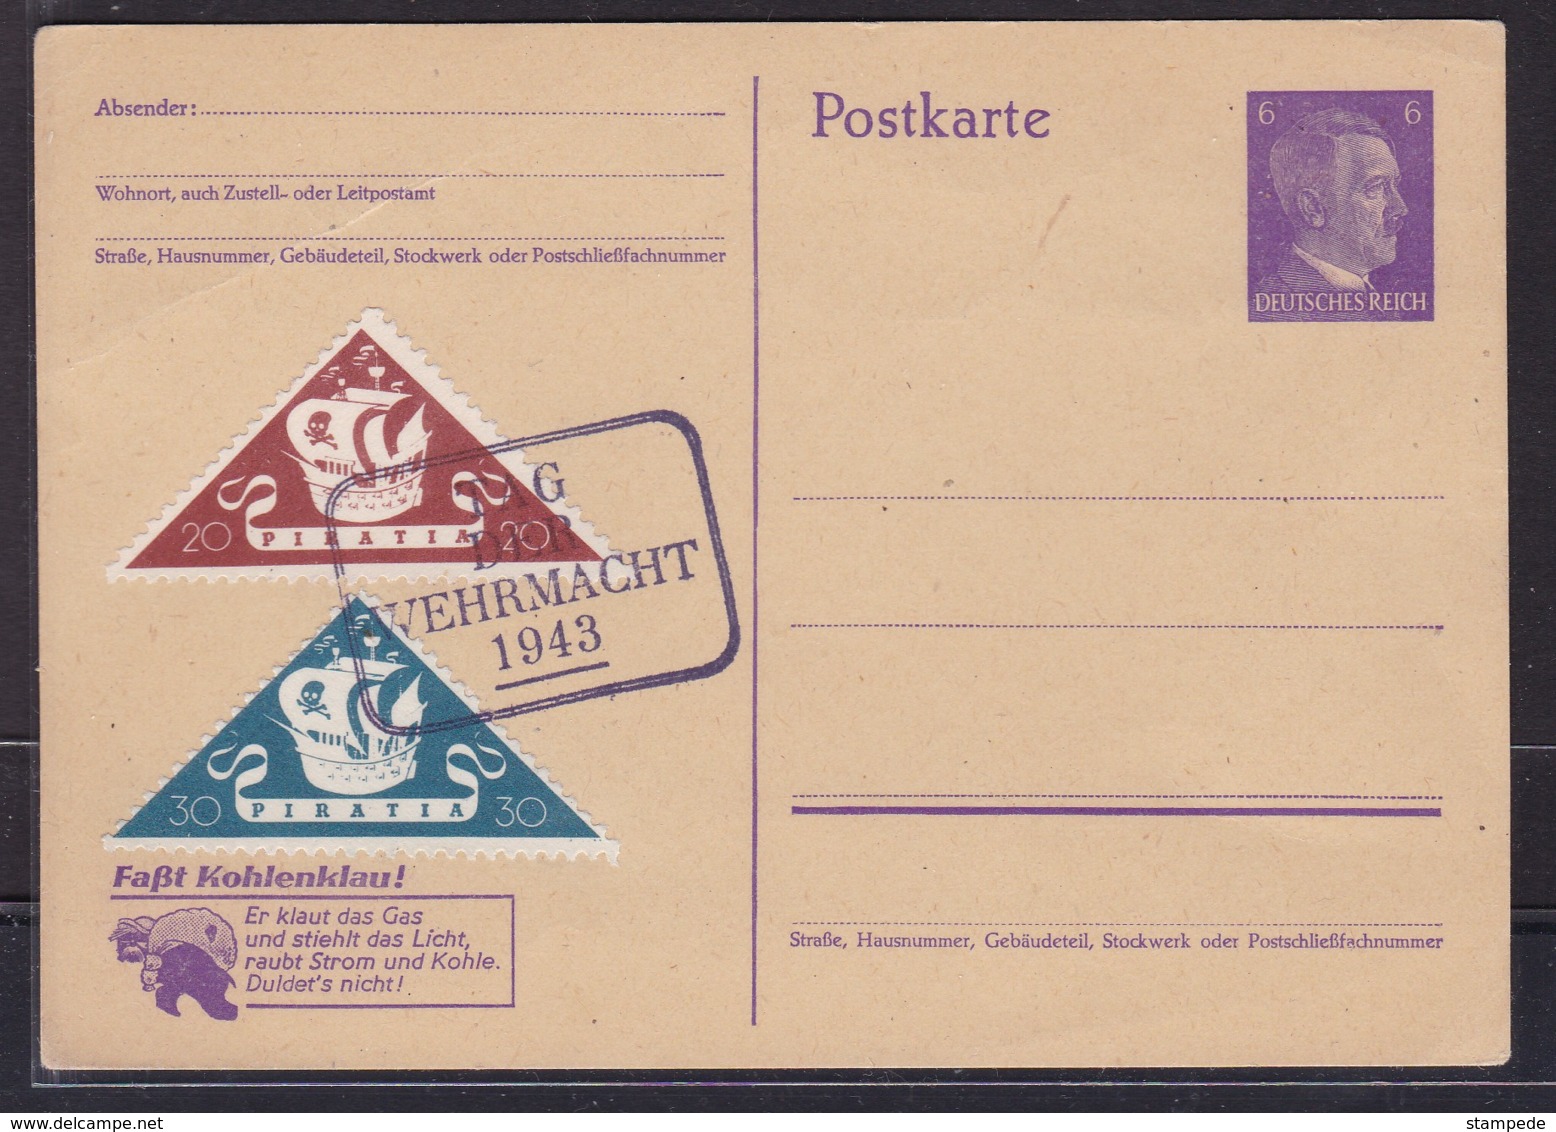 18813 - Stationery Postcard With 2 PIRATIA Stamps On Occasion Of "TAG DER WEHRMACHT 1943" - Briefe U. Dokumente